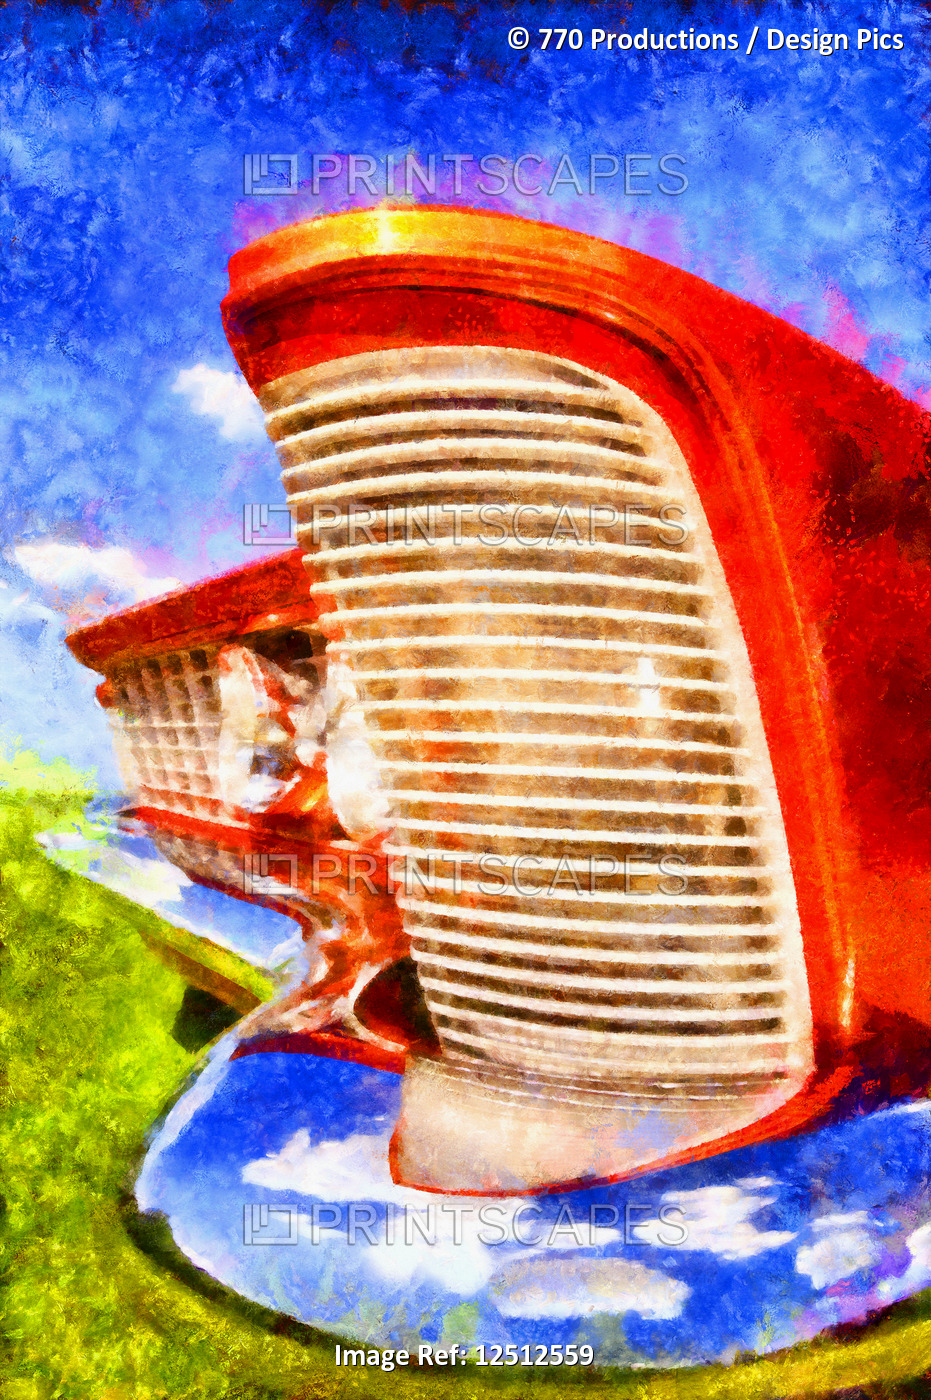 Digital painting of the grill and fender of an orange classic car